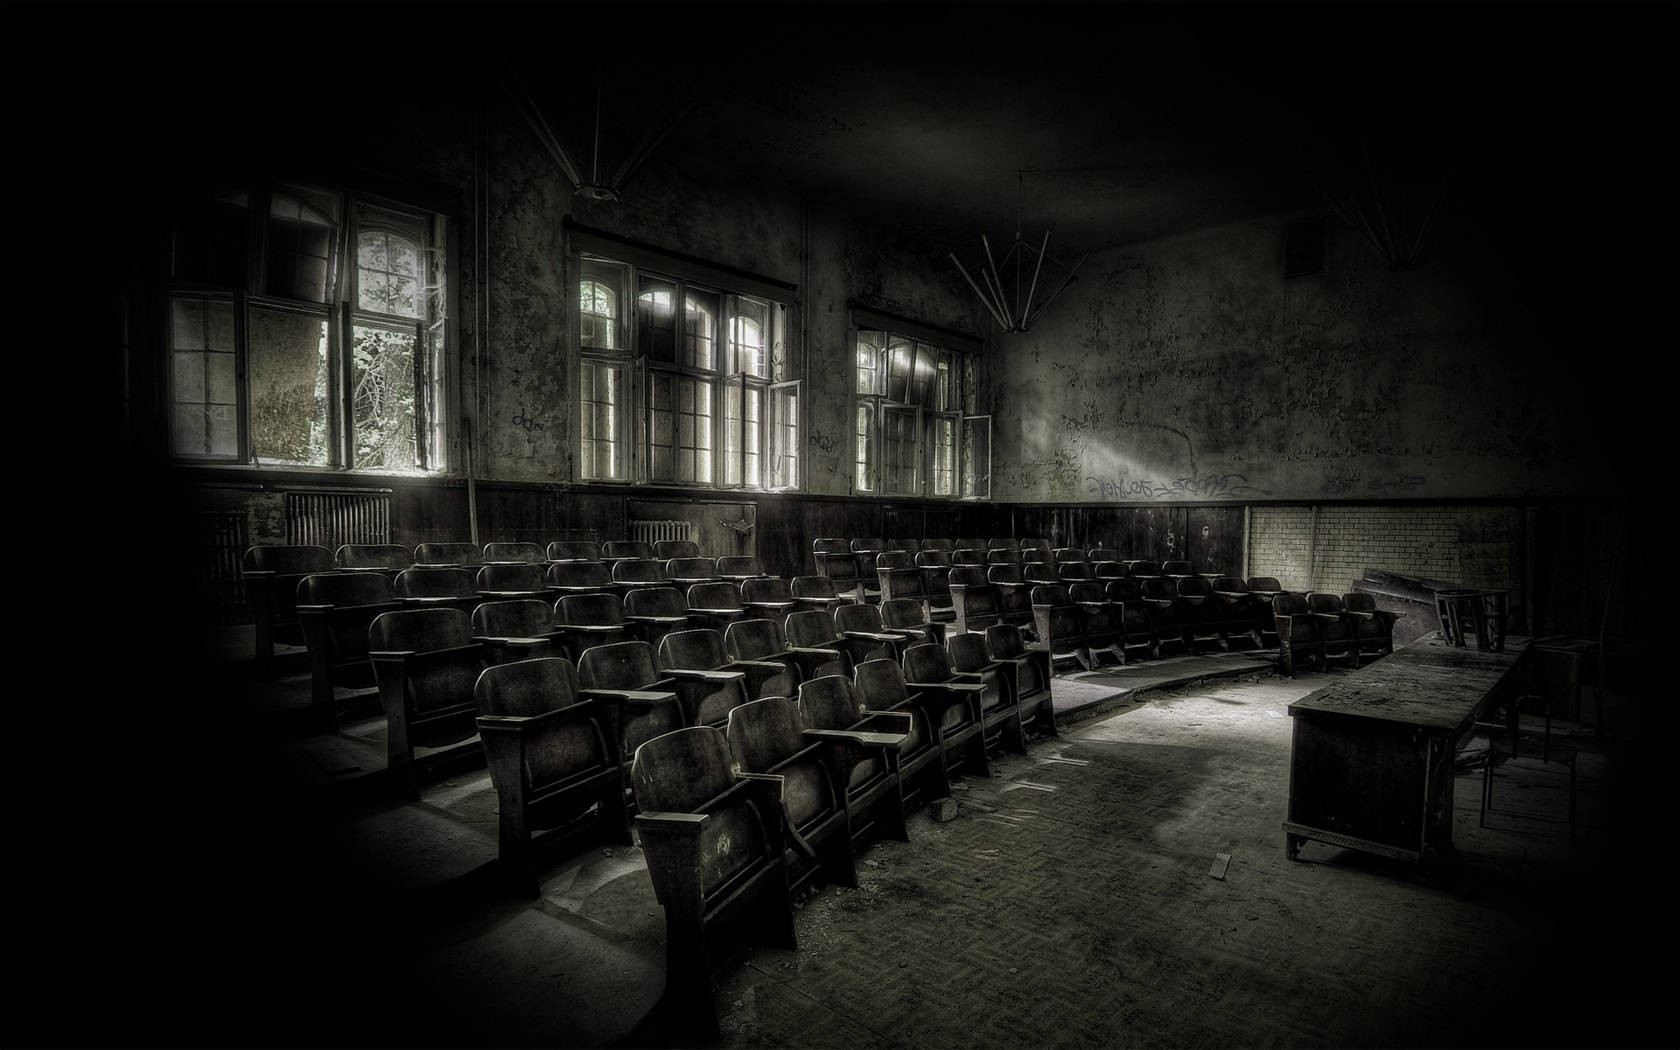 The eerie silence of a dimly lit, deserted classroom. Wallpaper